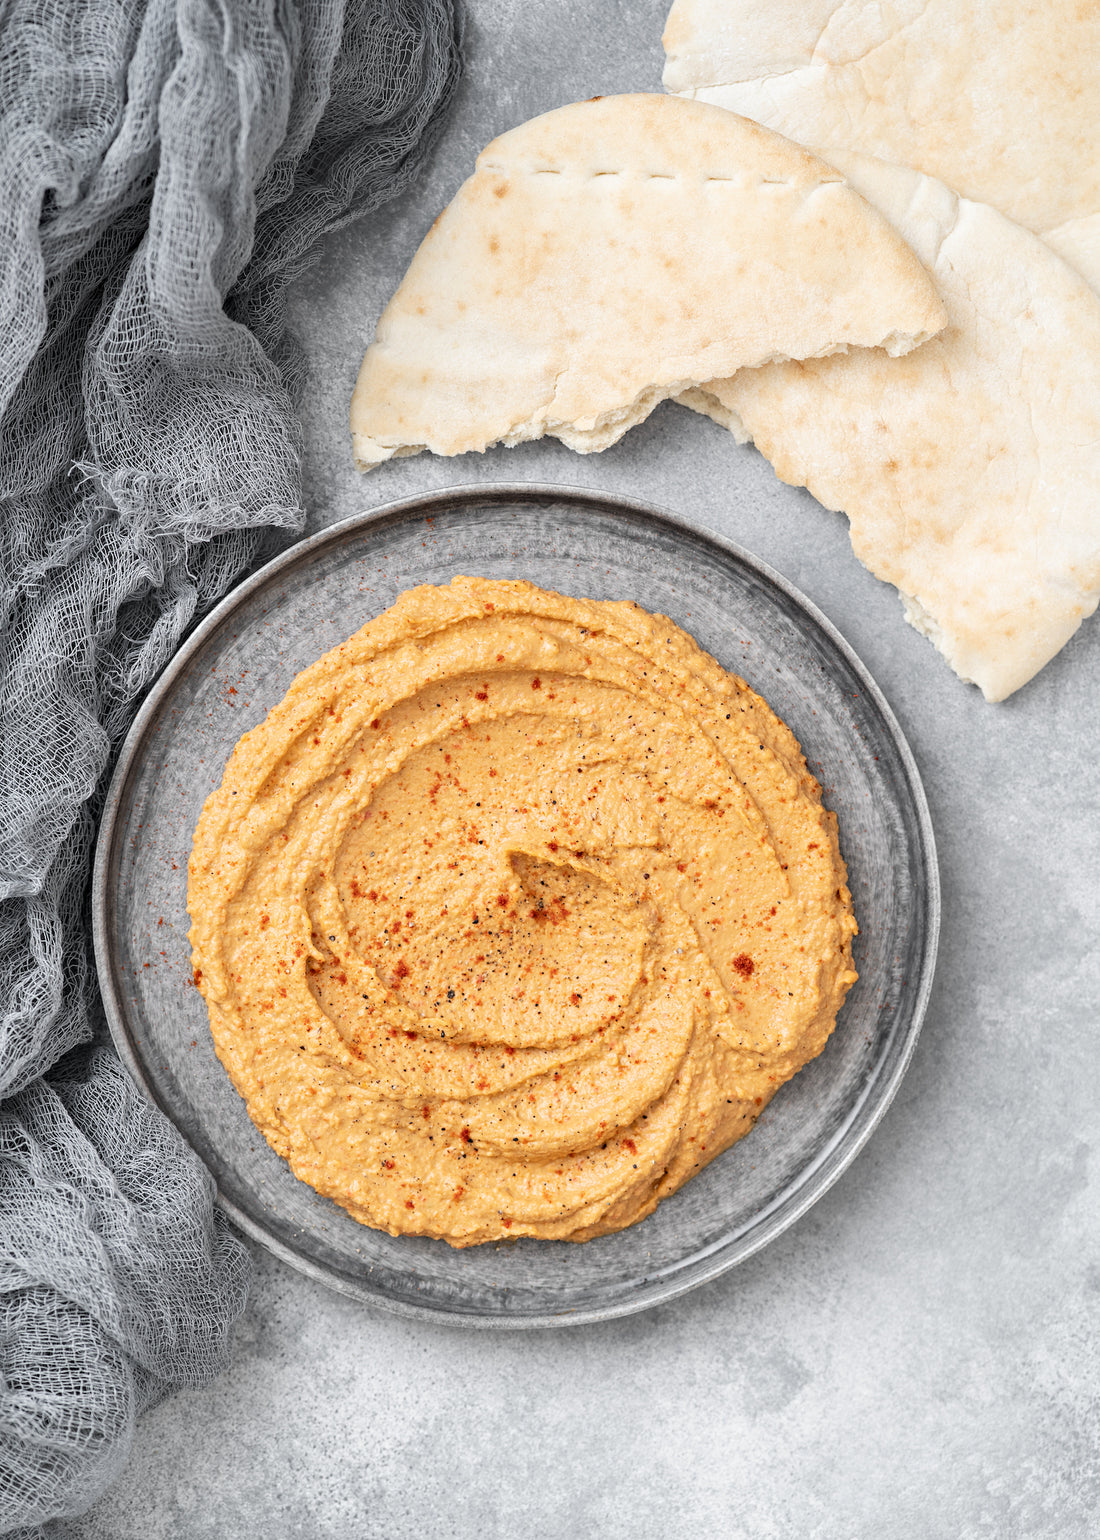 PCOS-Friendly Recipe - Roasted Red Pepper & Sun-dried Tomato Hummus